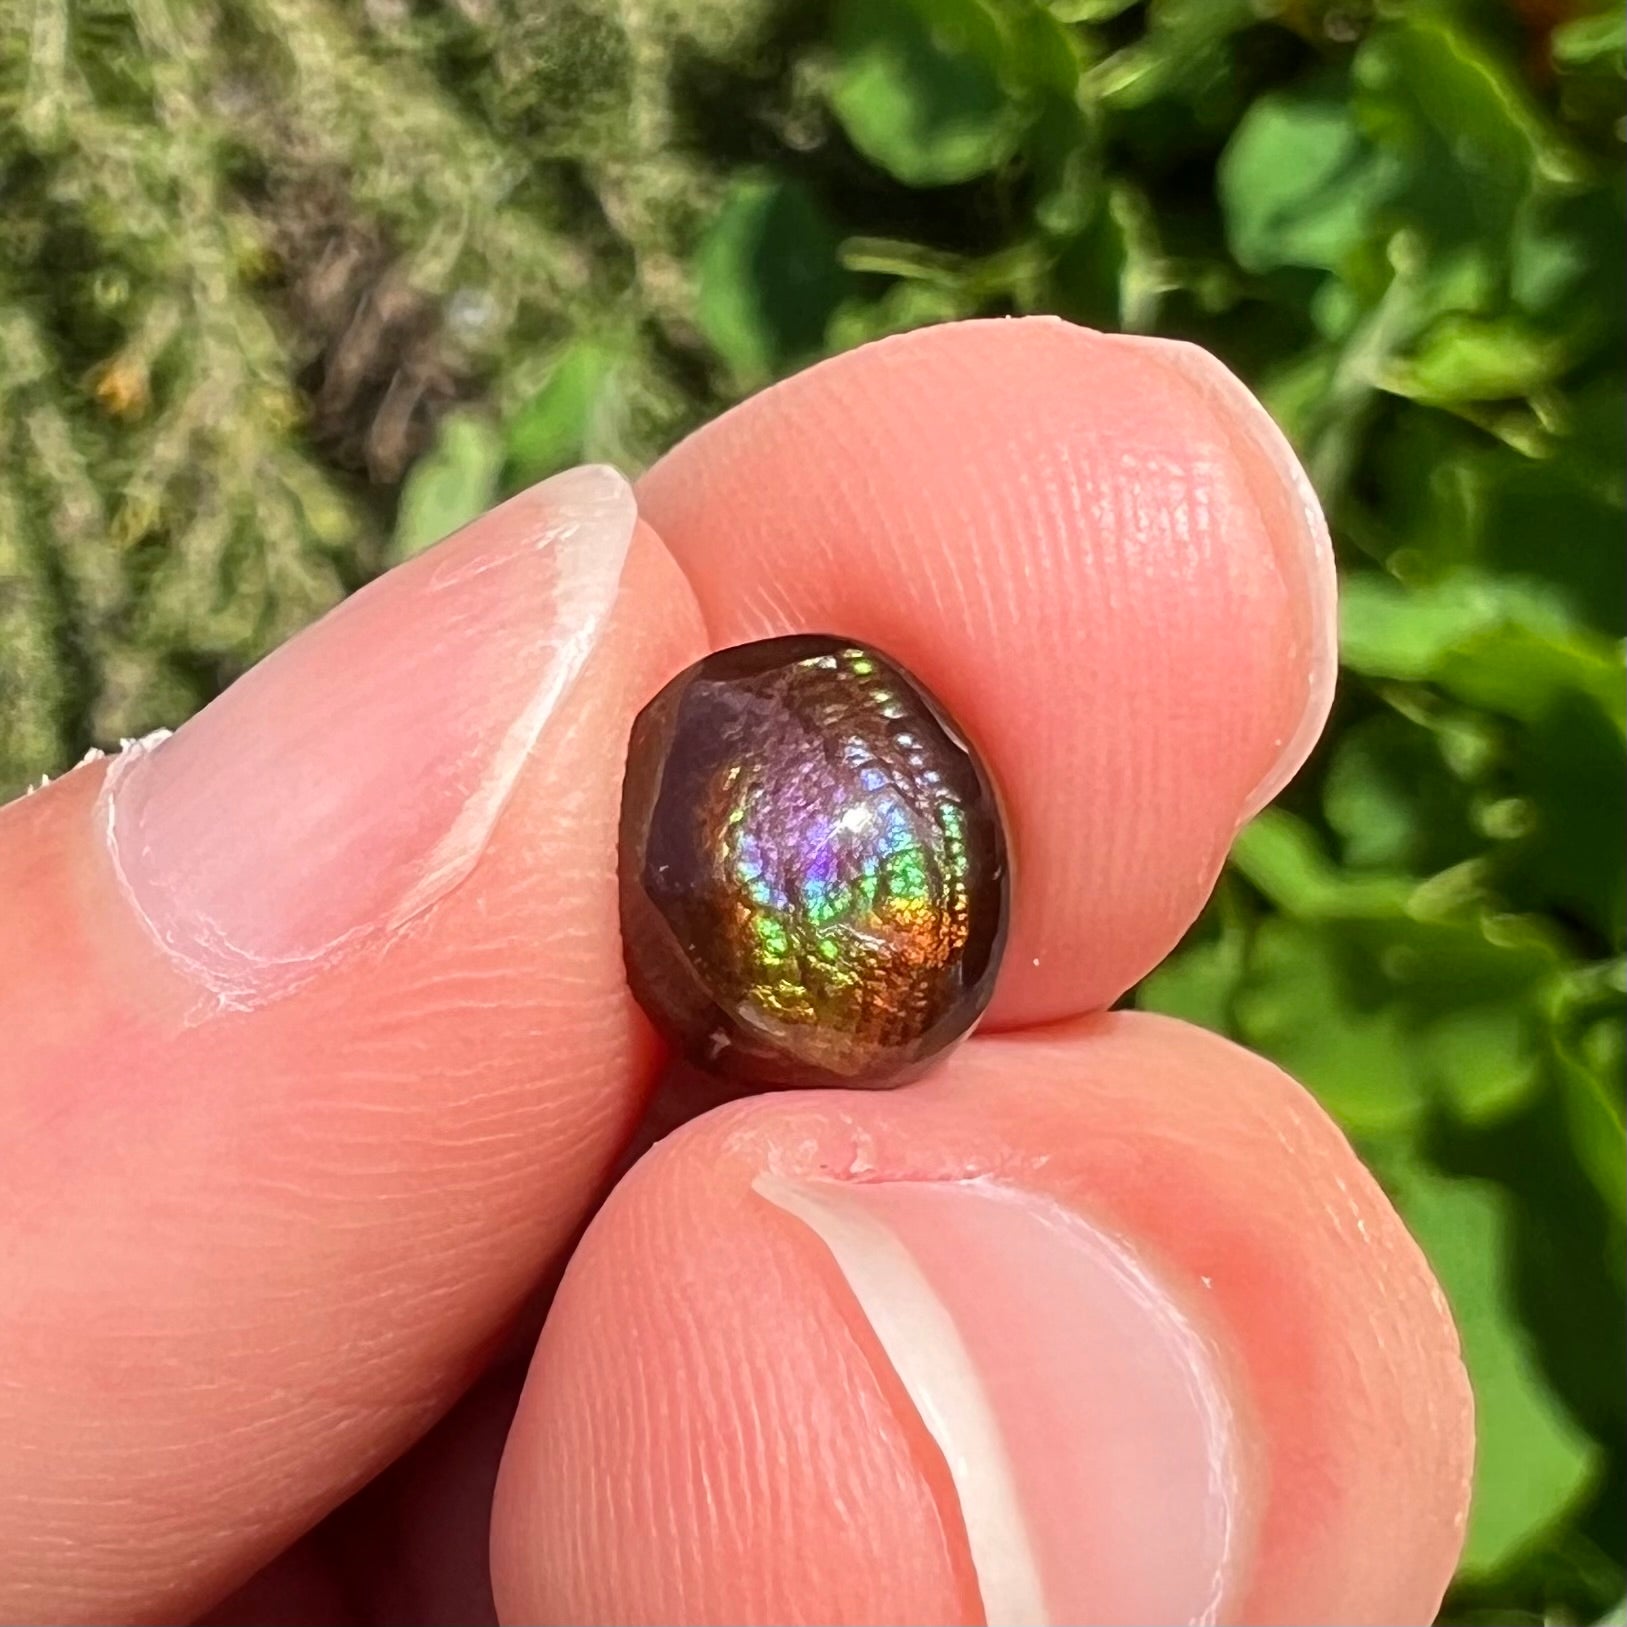 A loose, oval cabochon cut fire agate stone from Mexico.  The stone has an iridescent purple and teal blue eye of color.